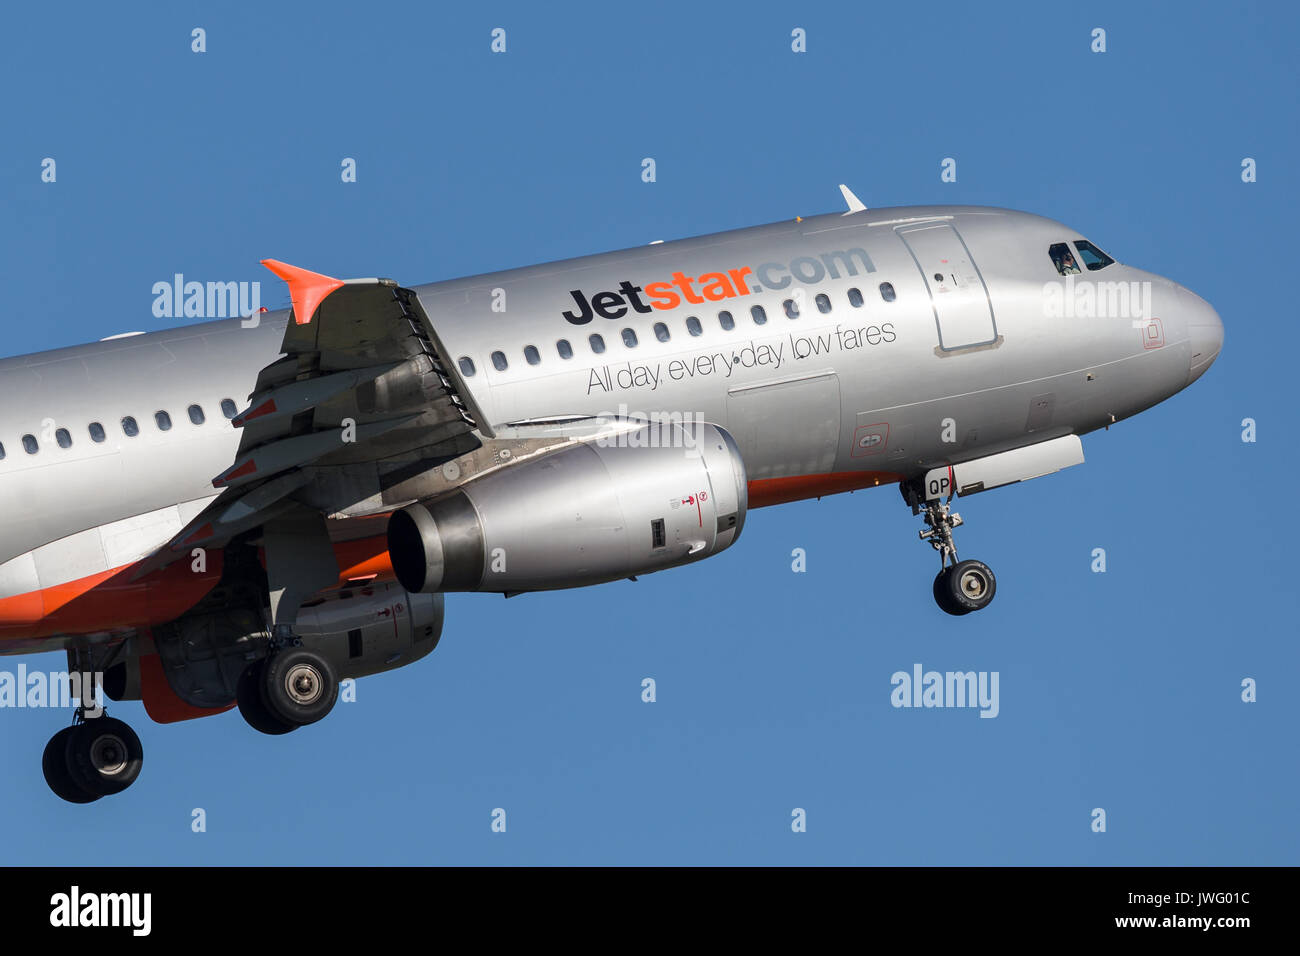 Jetstar Airways Airbus A320 airliner taking off from Sydney Airport. Stock Photo